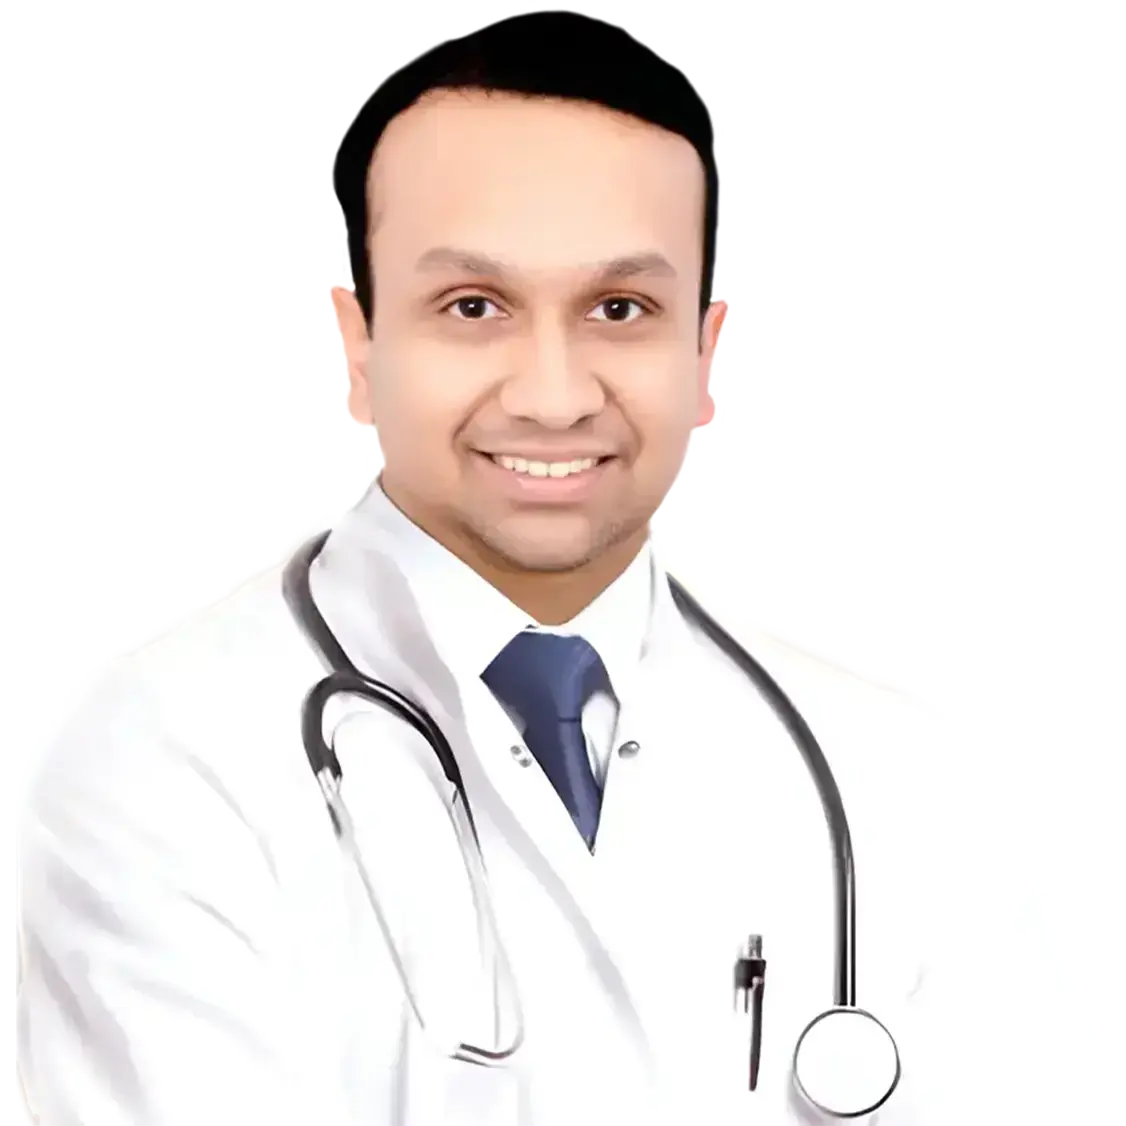 DR. ASHISH JAIN M.B.B.S.(AFMC), M.S.(ORTH), M.CH., DIP.SICOT, AOSPINE SENIOR CONSULTANT DEPARTMENT OF SPINE SURGERY